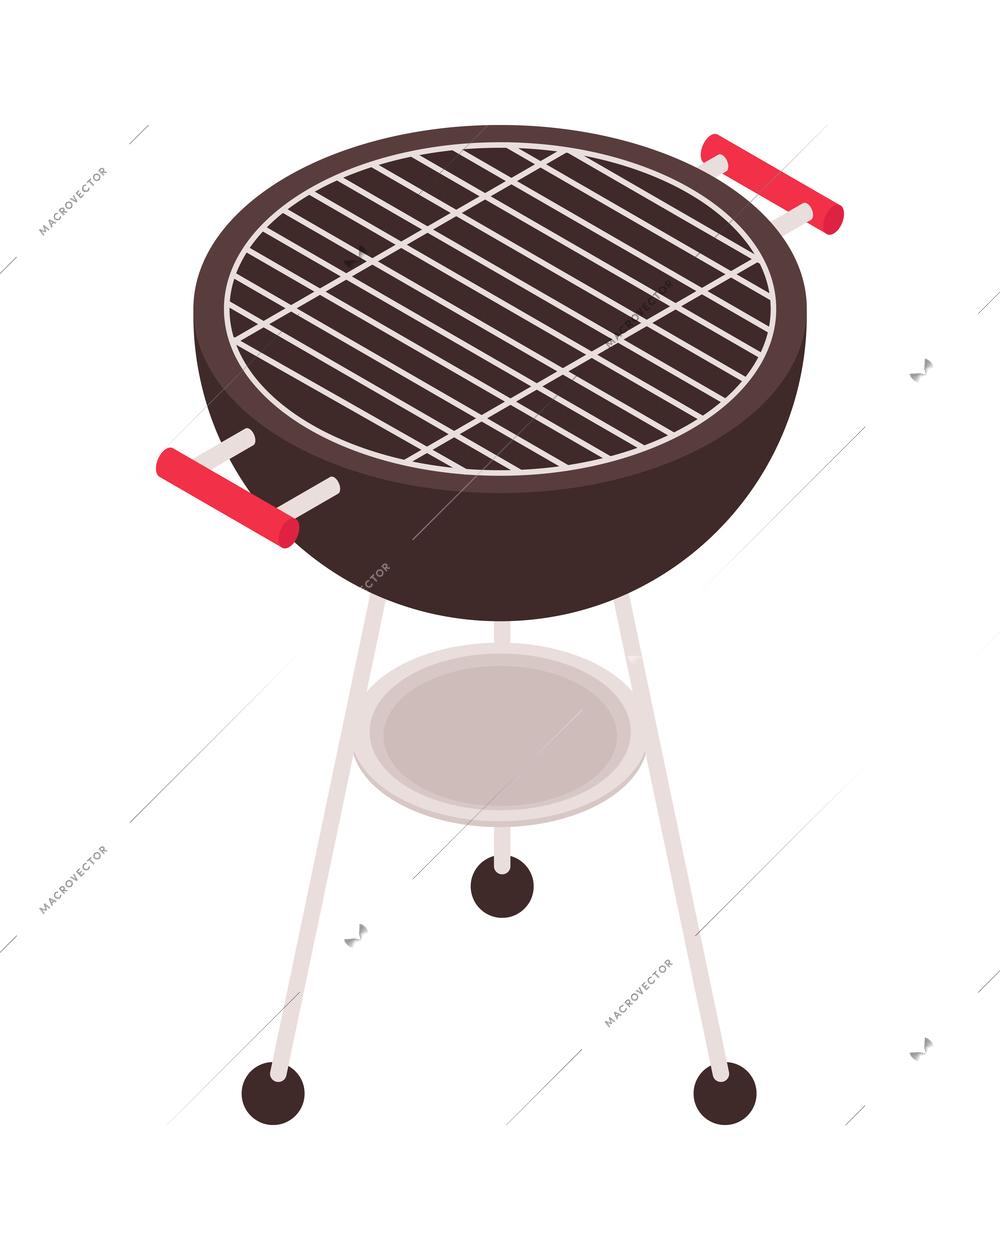 Isometric bbq barbecue grill party composition with isolated image of roasting rig vector illustration